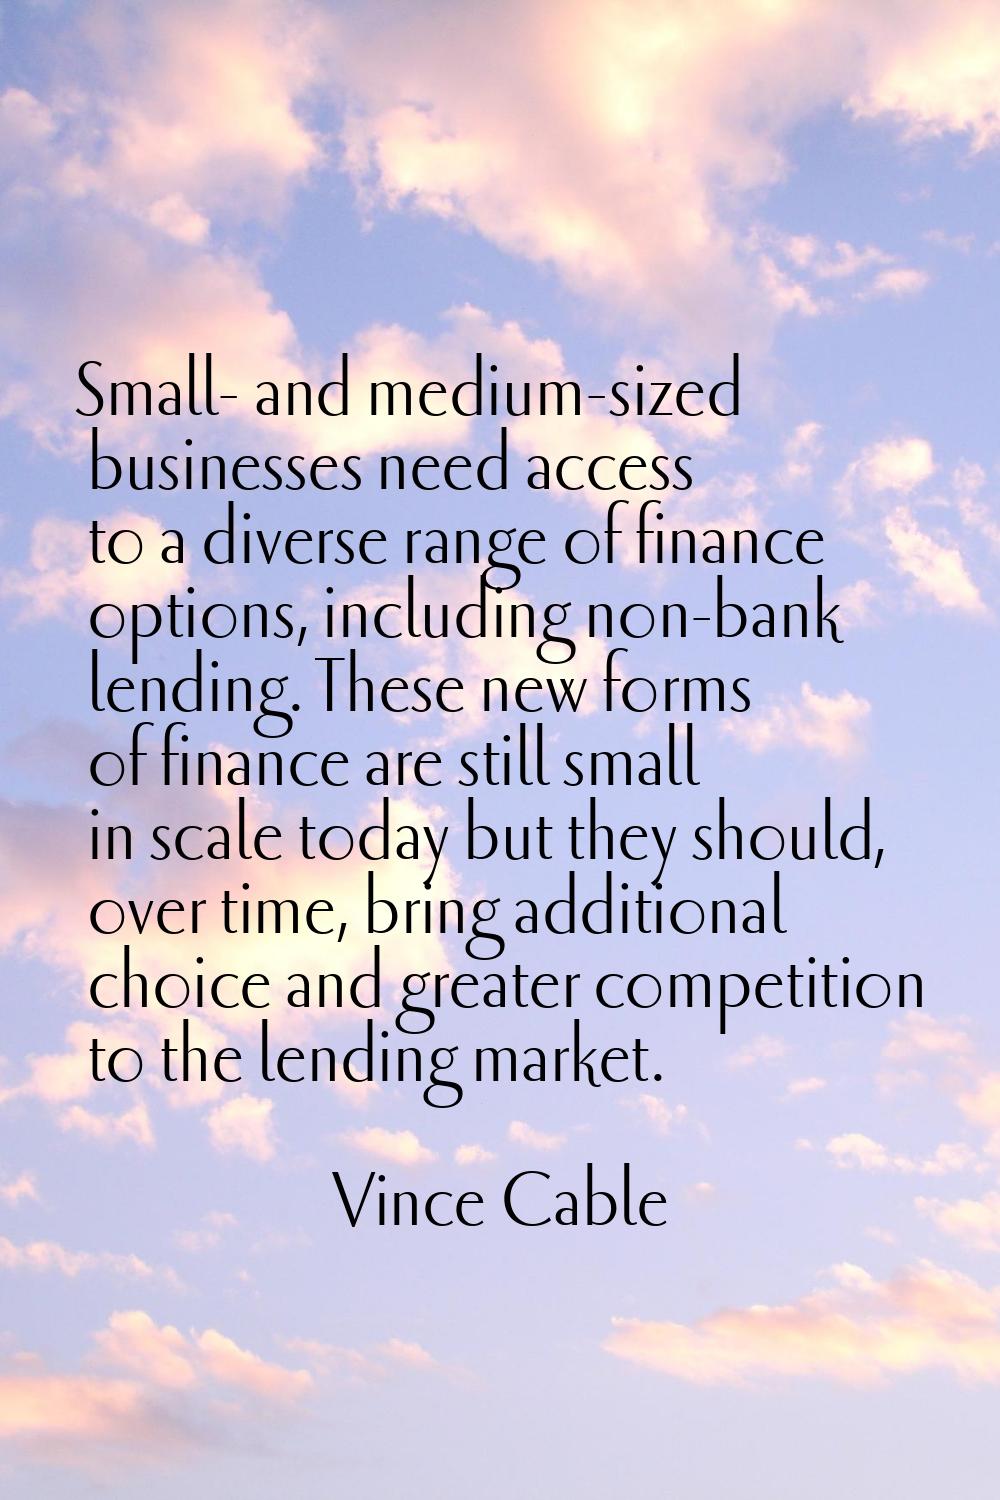 Small- and medium-sized businesses need access to a diverse range of finance options, including non